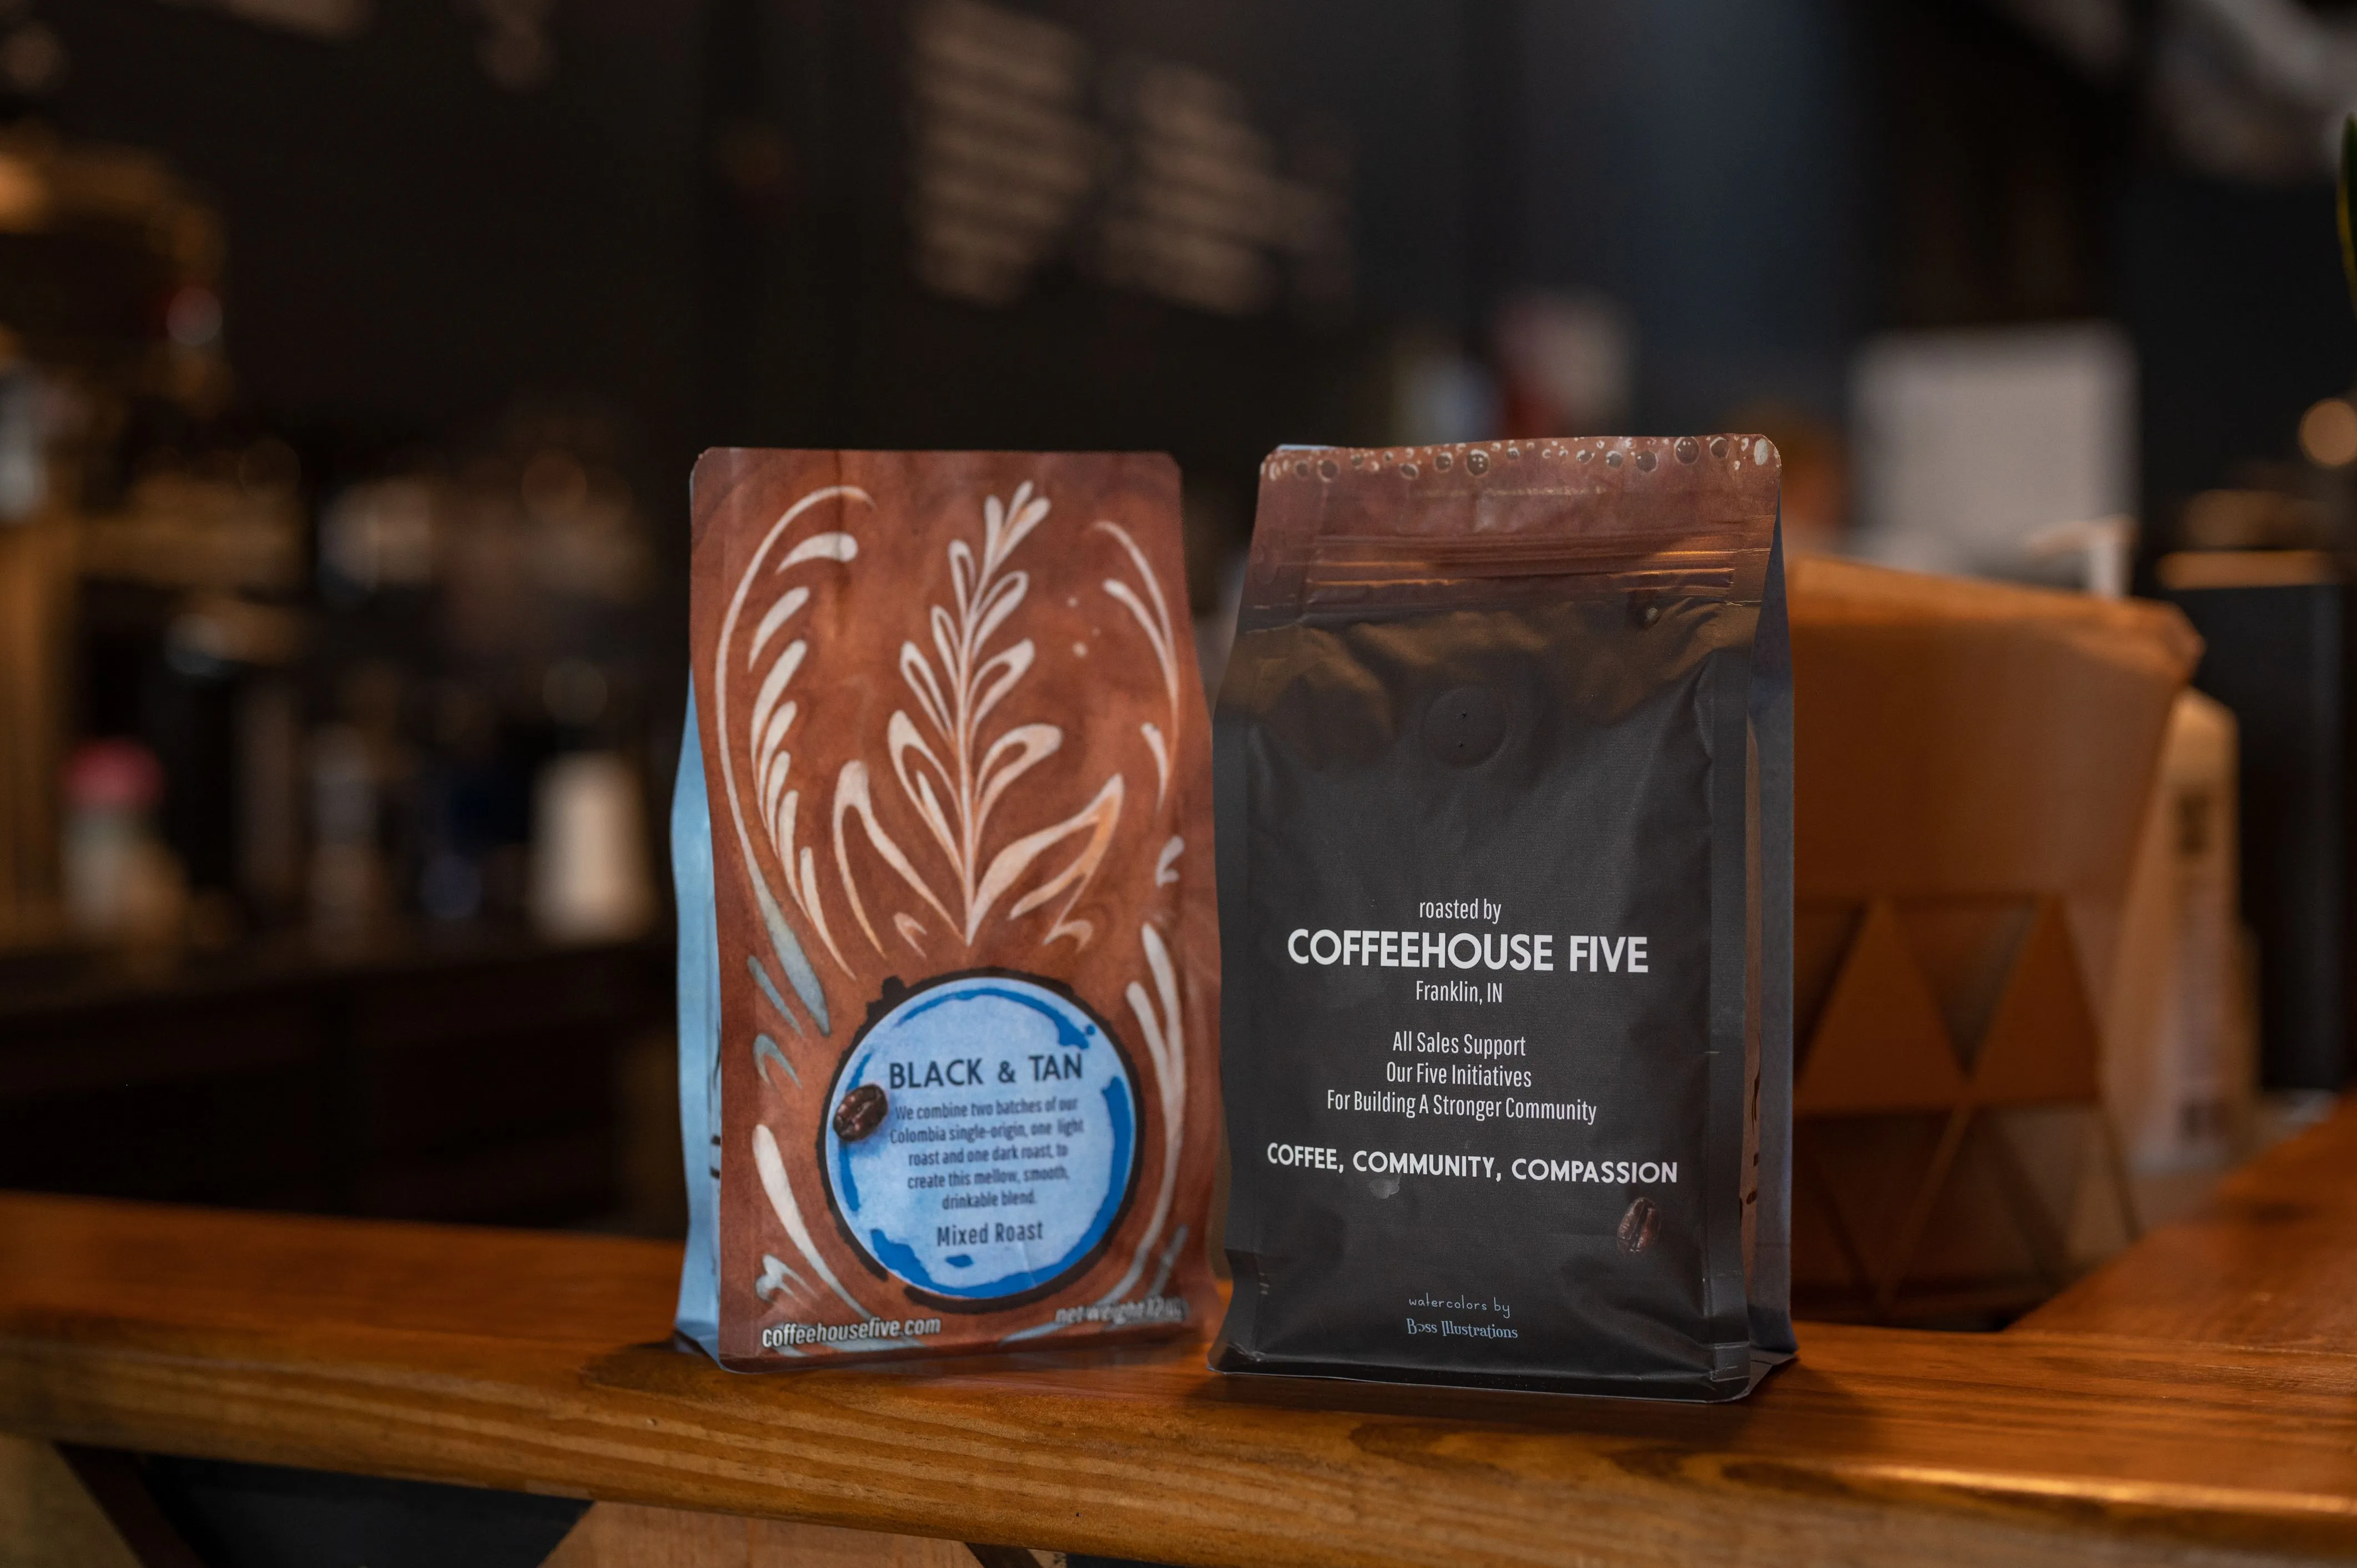 Two bags of Coffeehouse Five brand coffee on a wooden counter with a blurred coffee shop background.